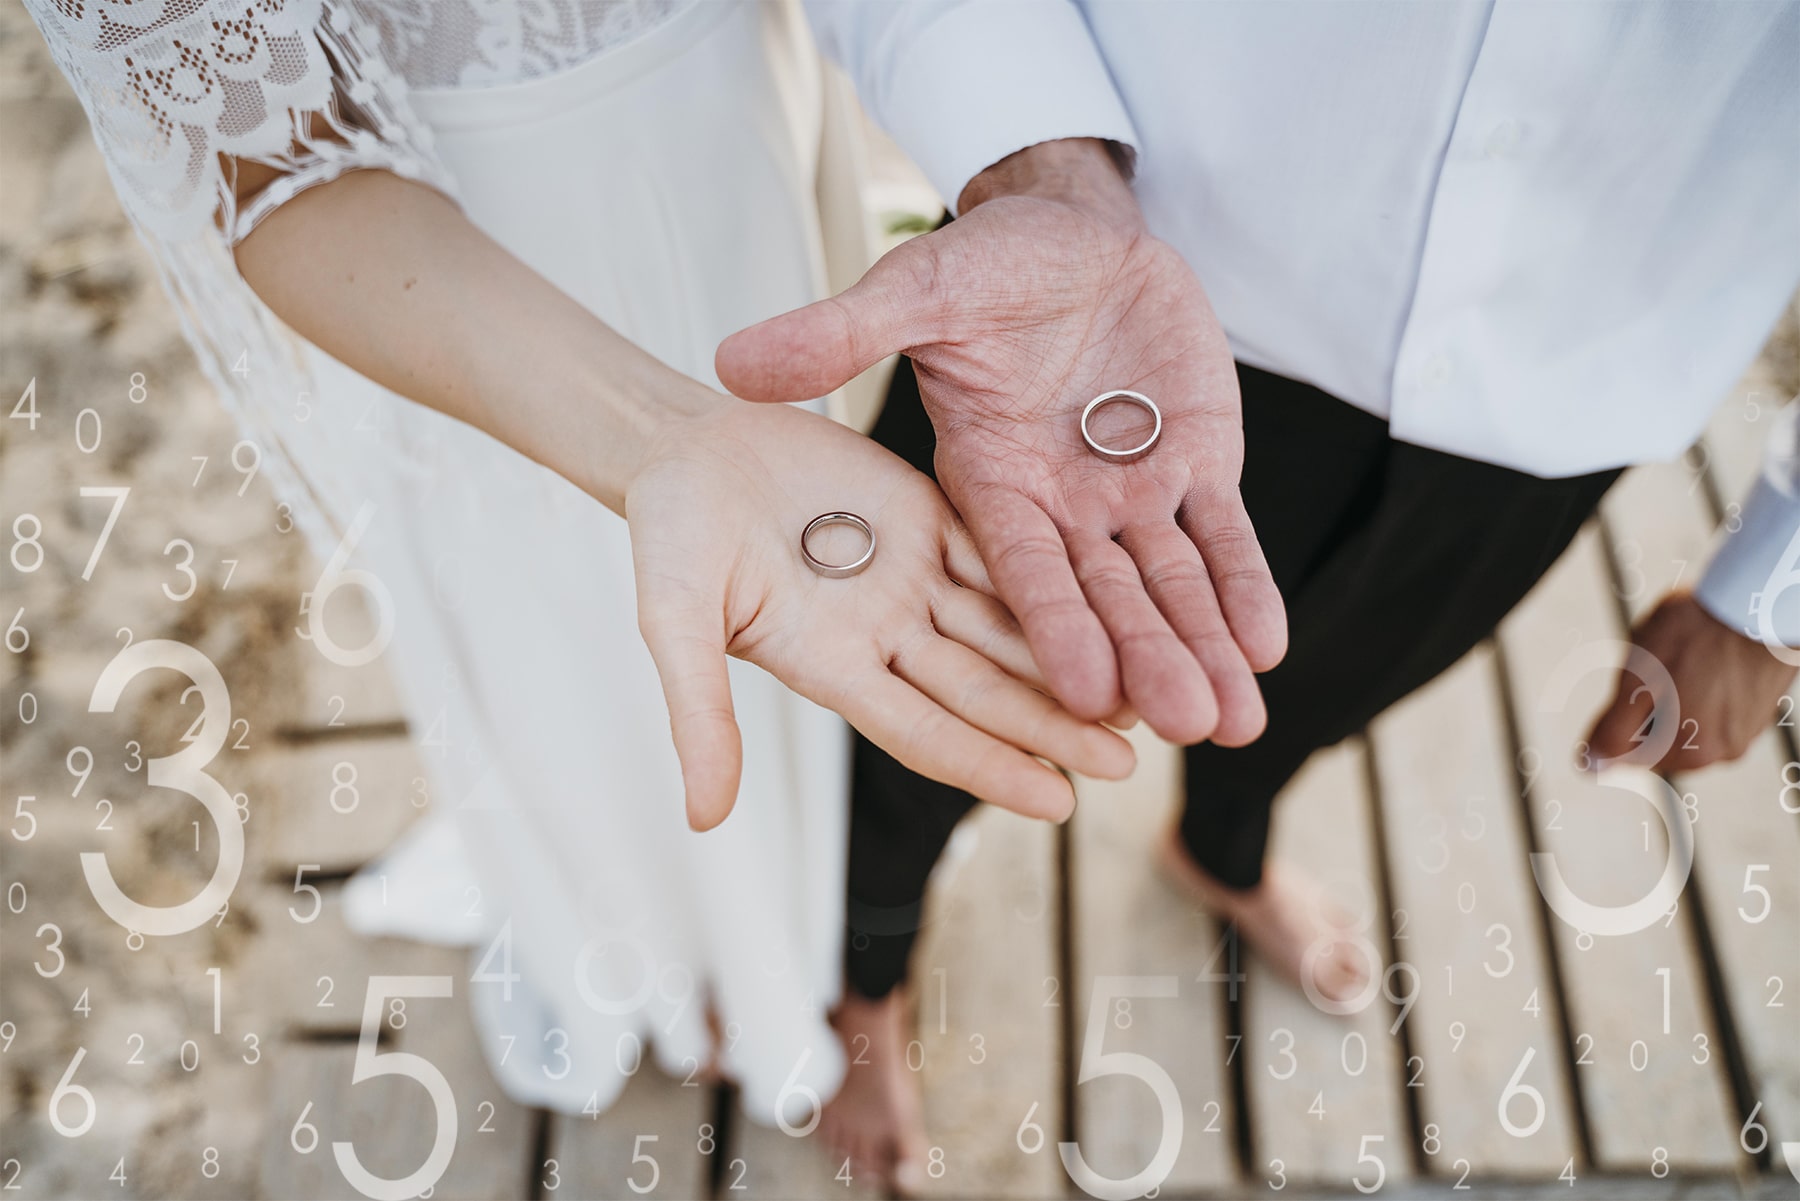 Numerology For Marriage 